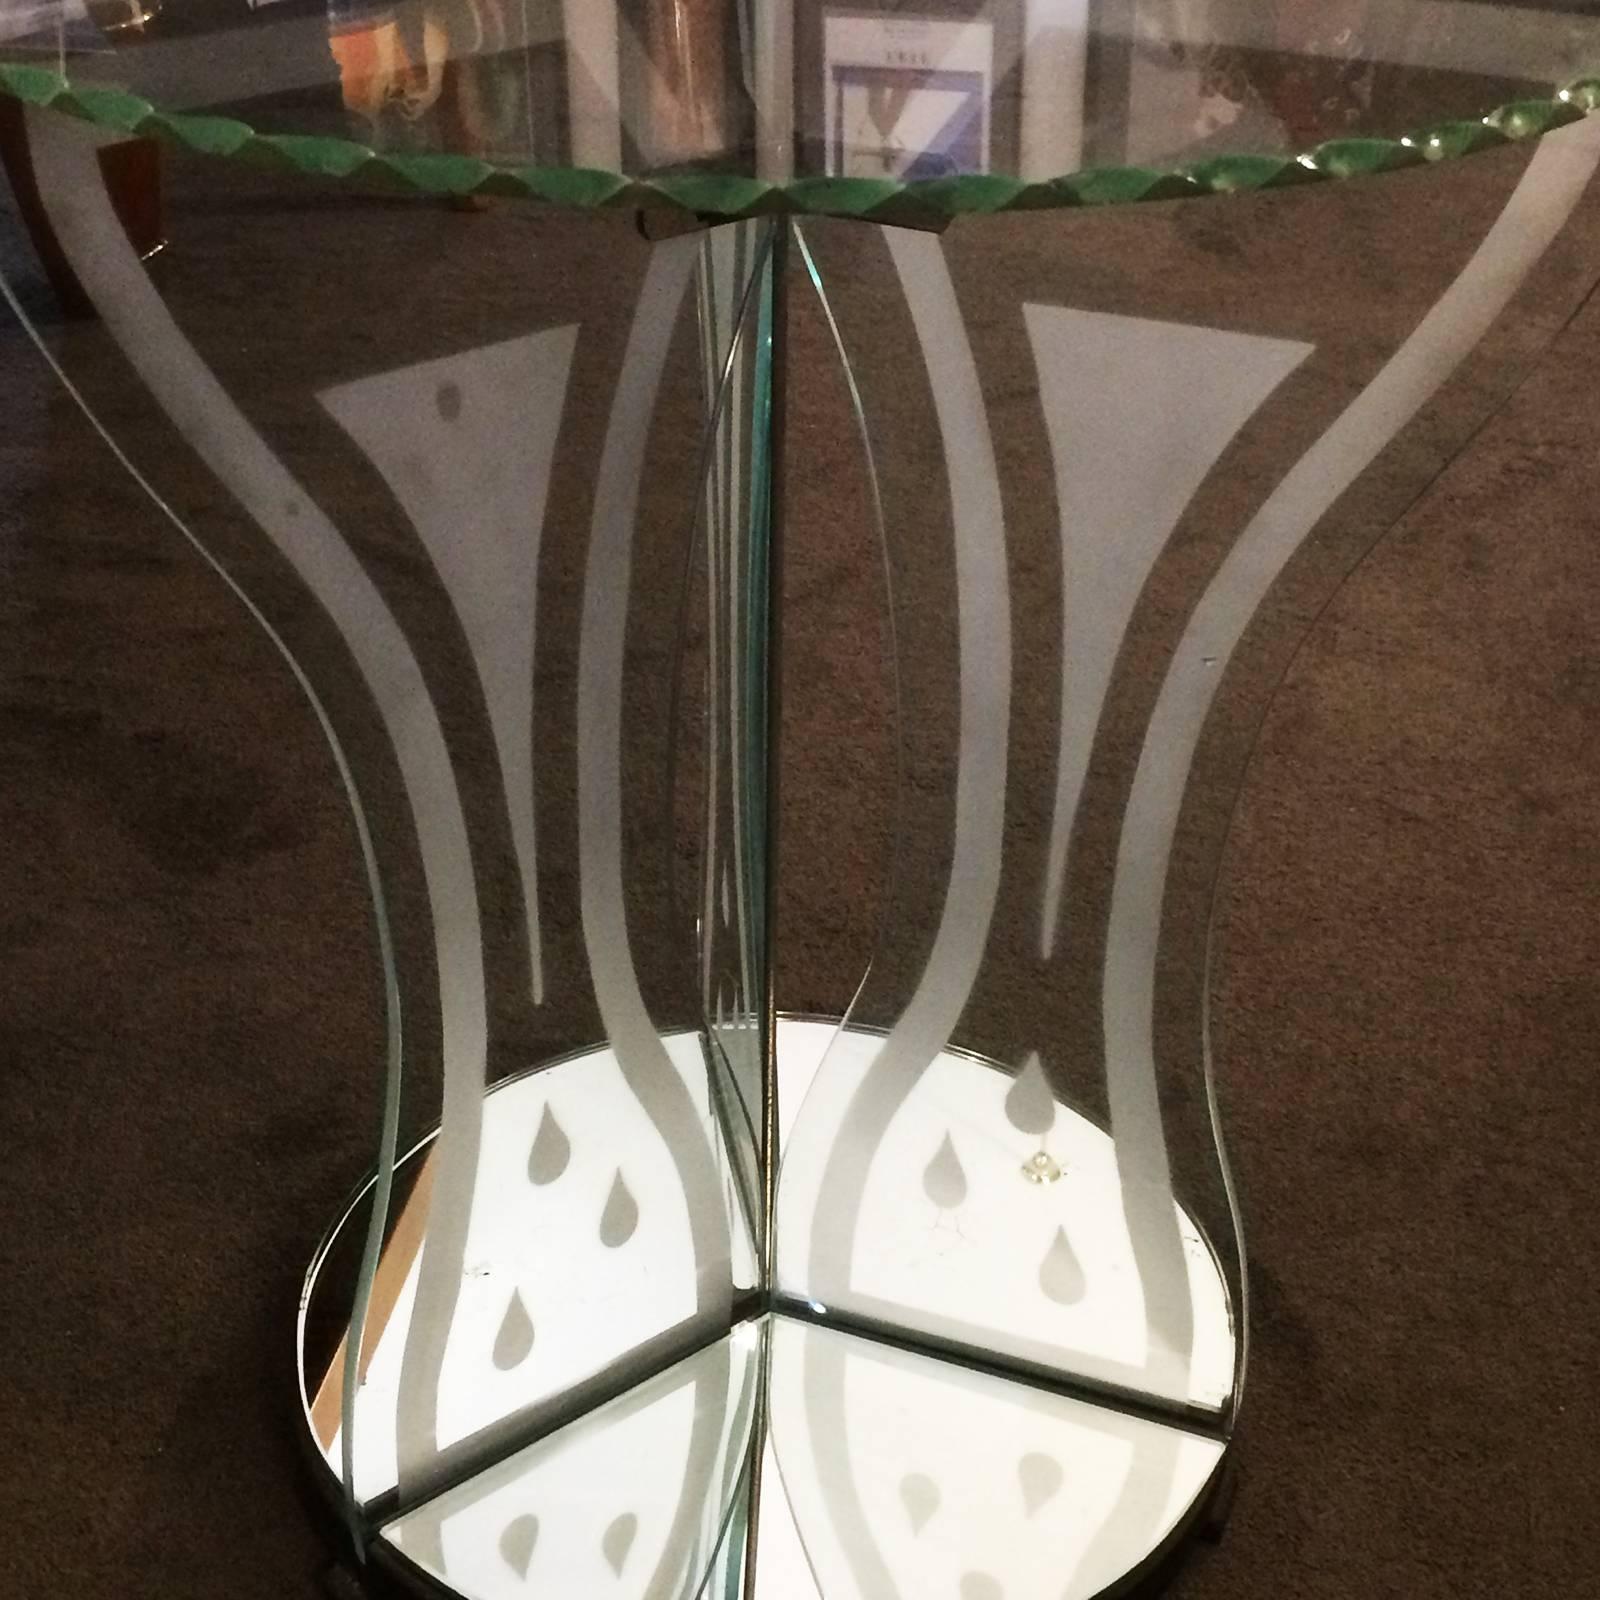 Art Deco Etched Glass Mirror Coffee Side Table In Excellent Condition For Sale In Daylesford, Victoria